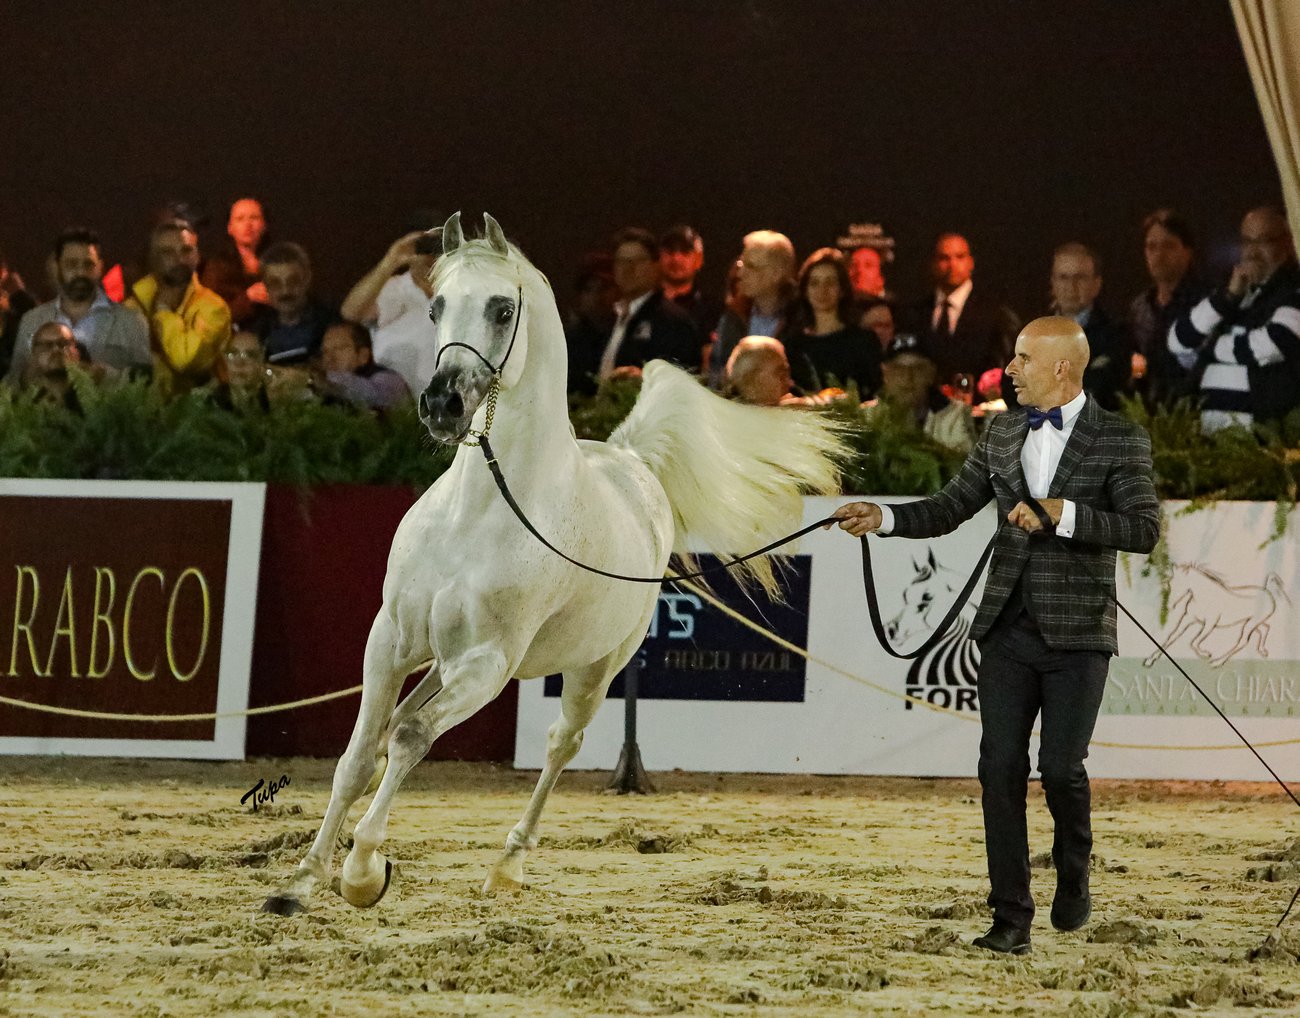 El Jahez WH with Arthur Nascimento during the Brazilian Nationals in 2019, by Tupa